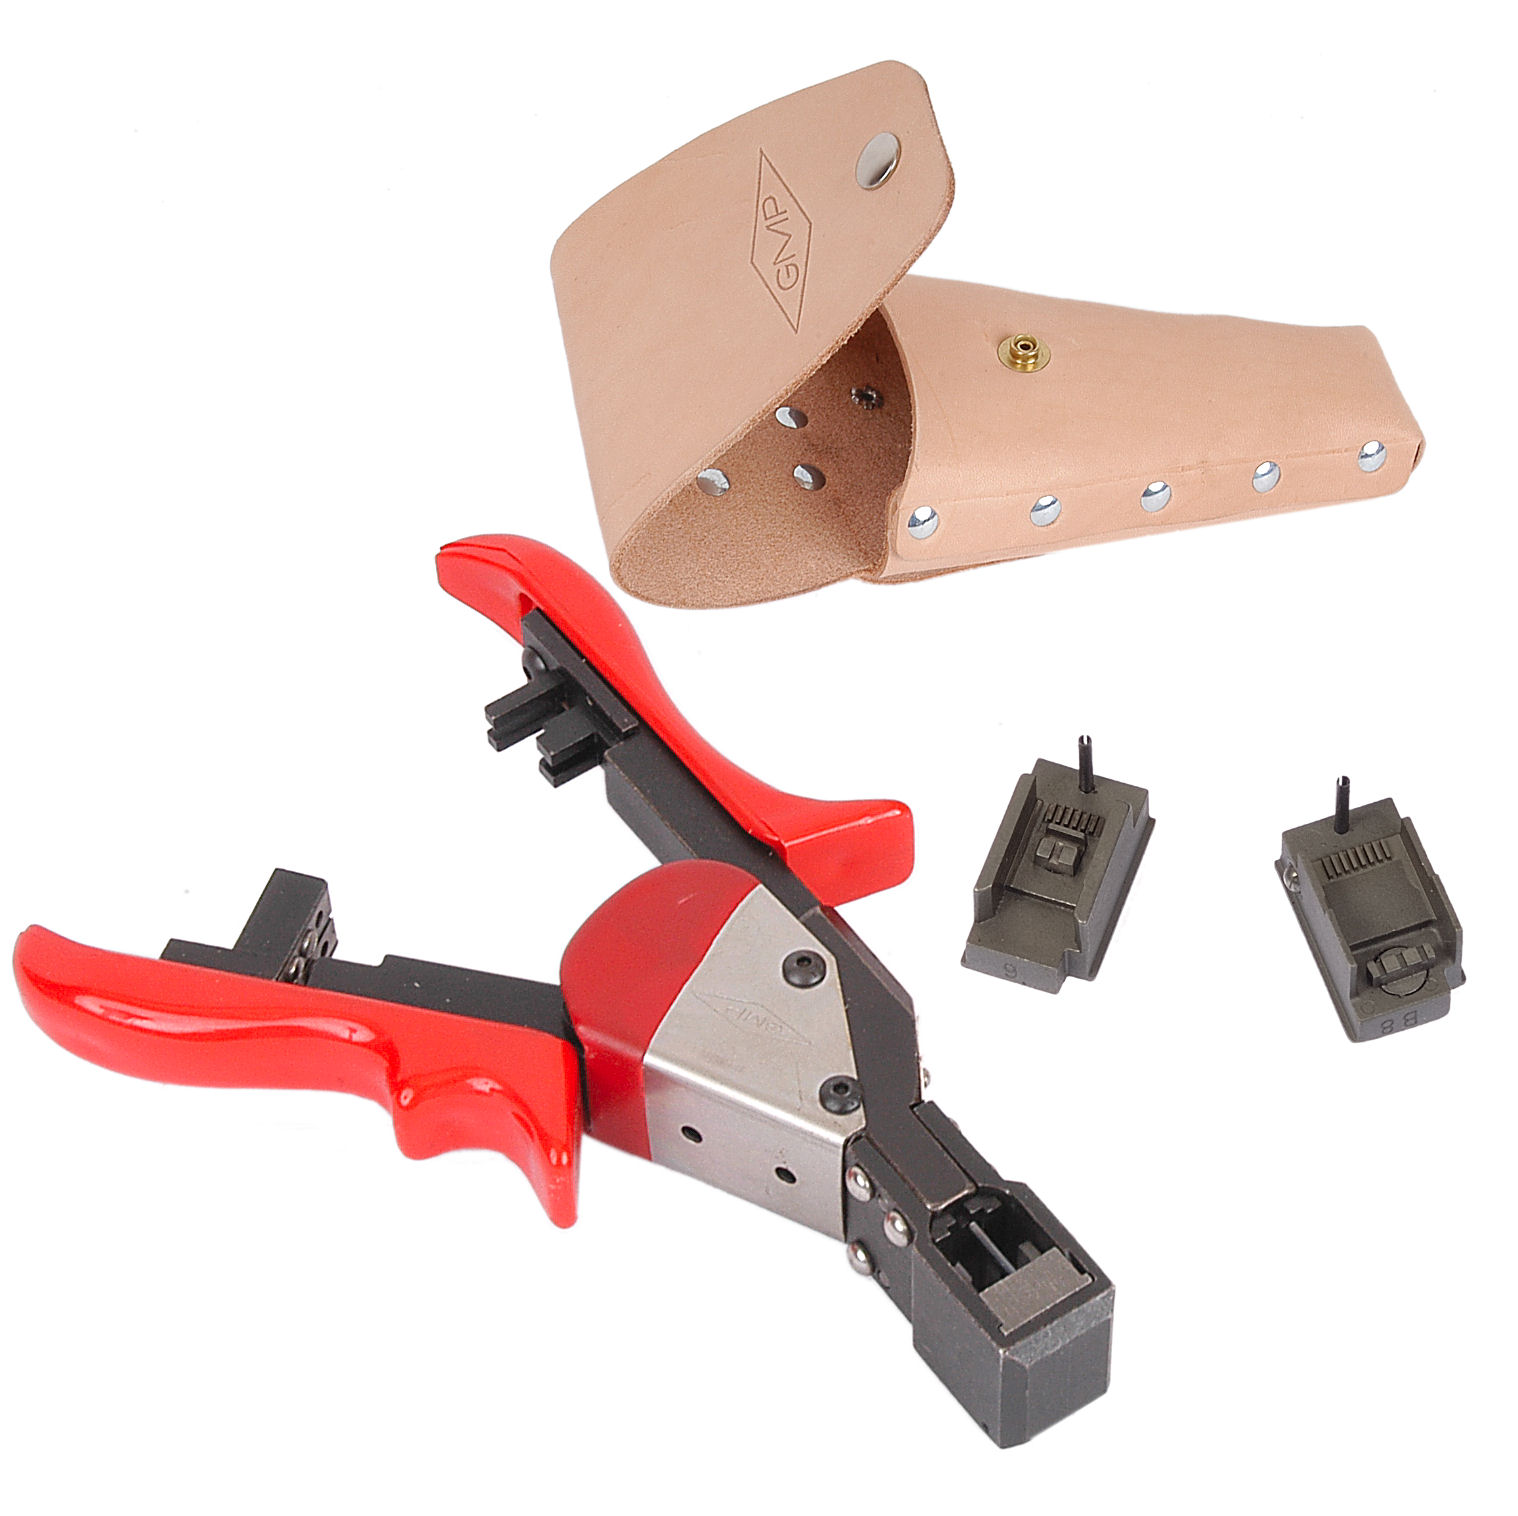 Modular Plug Presser with dies and holster